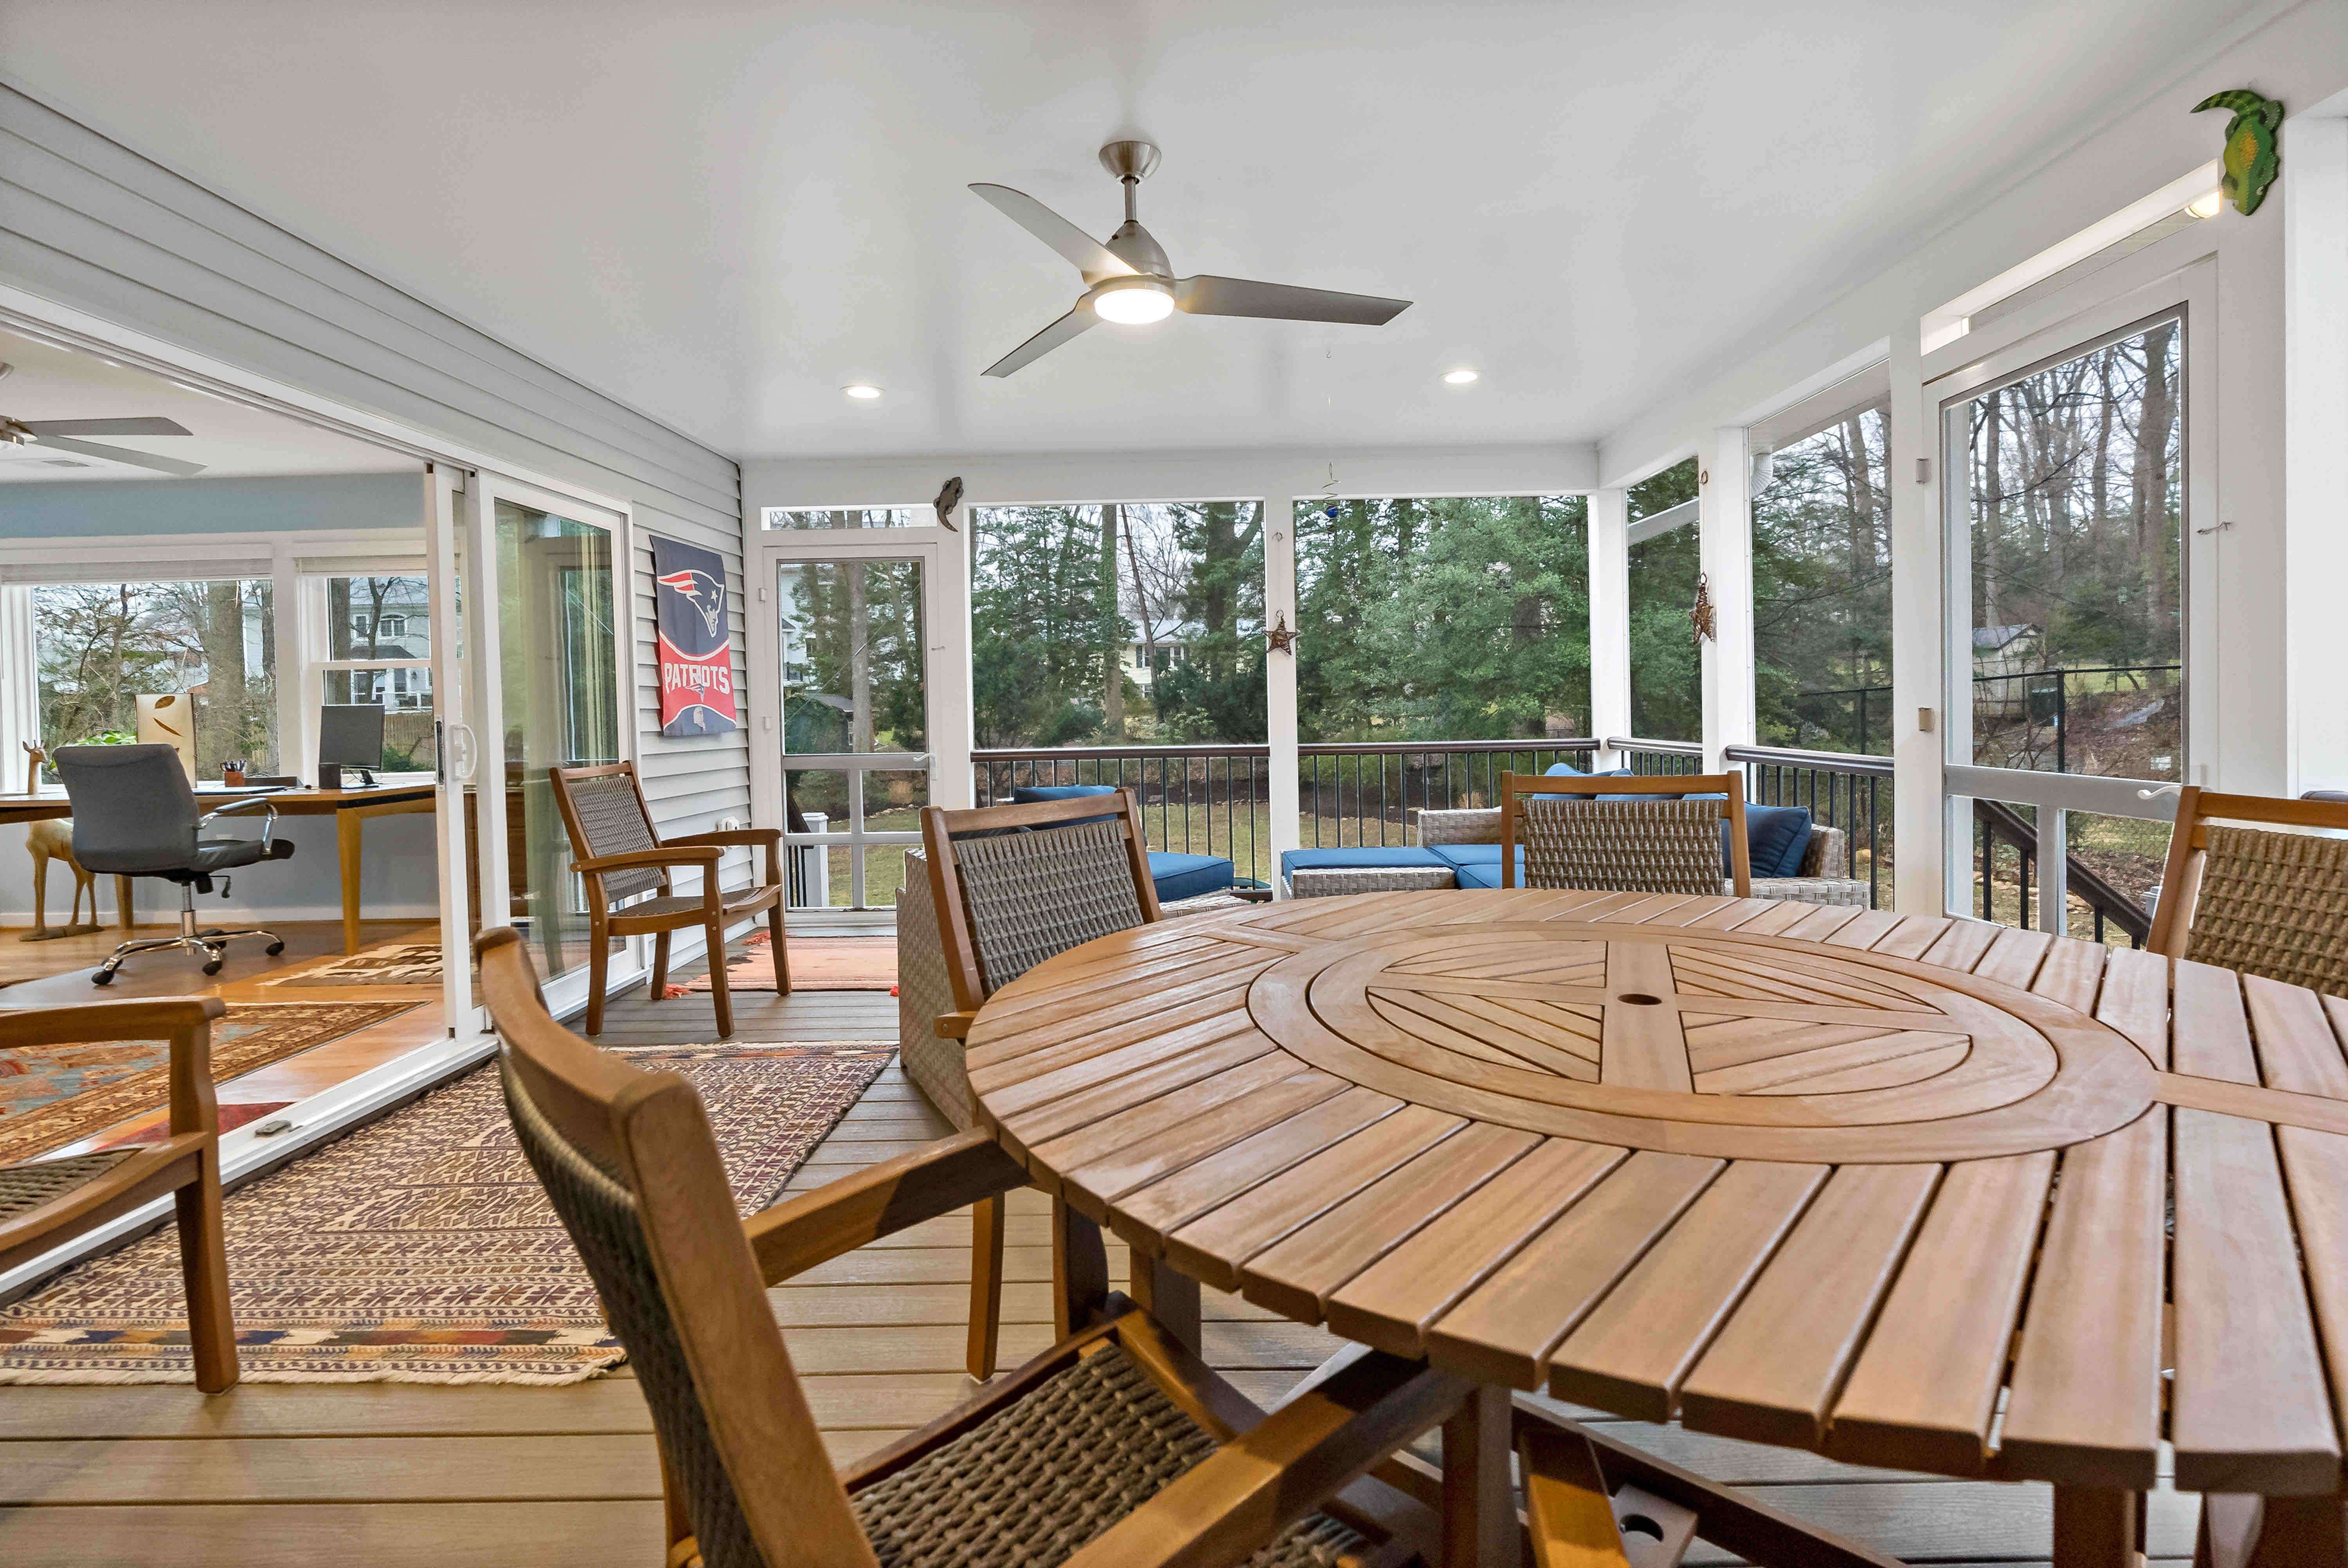 Open and spacious screened porch with wooden patio furniture